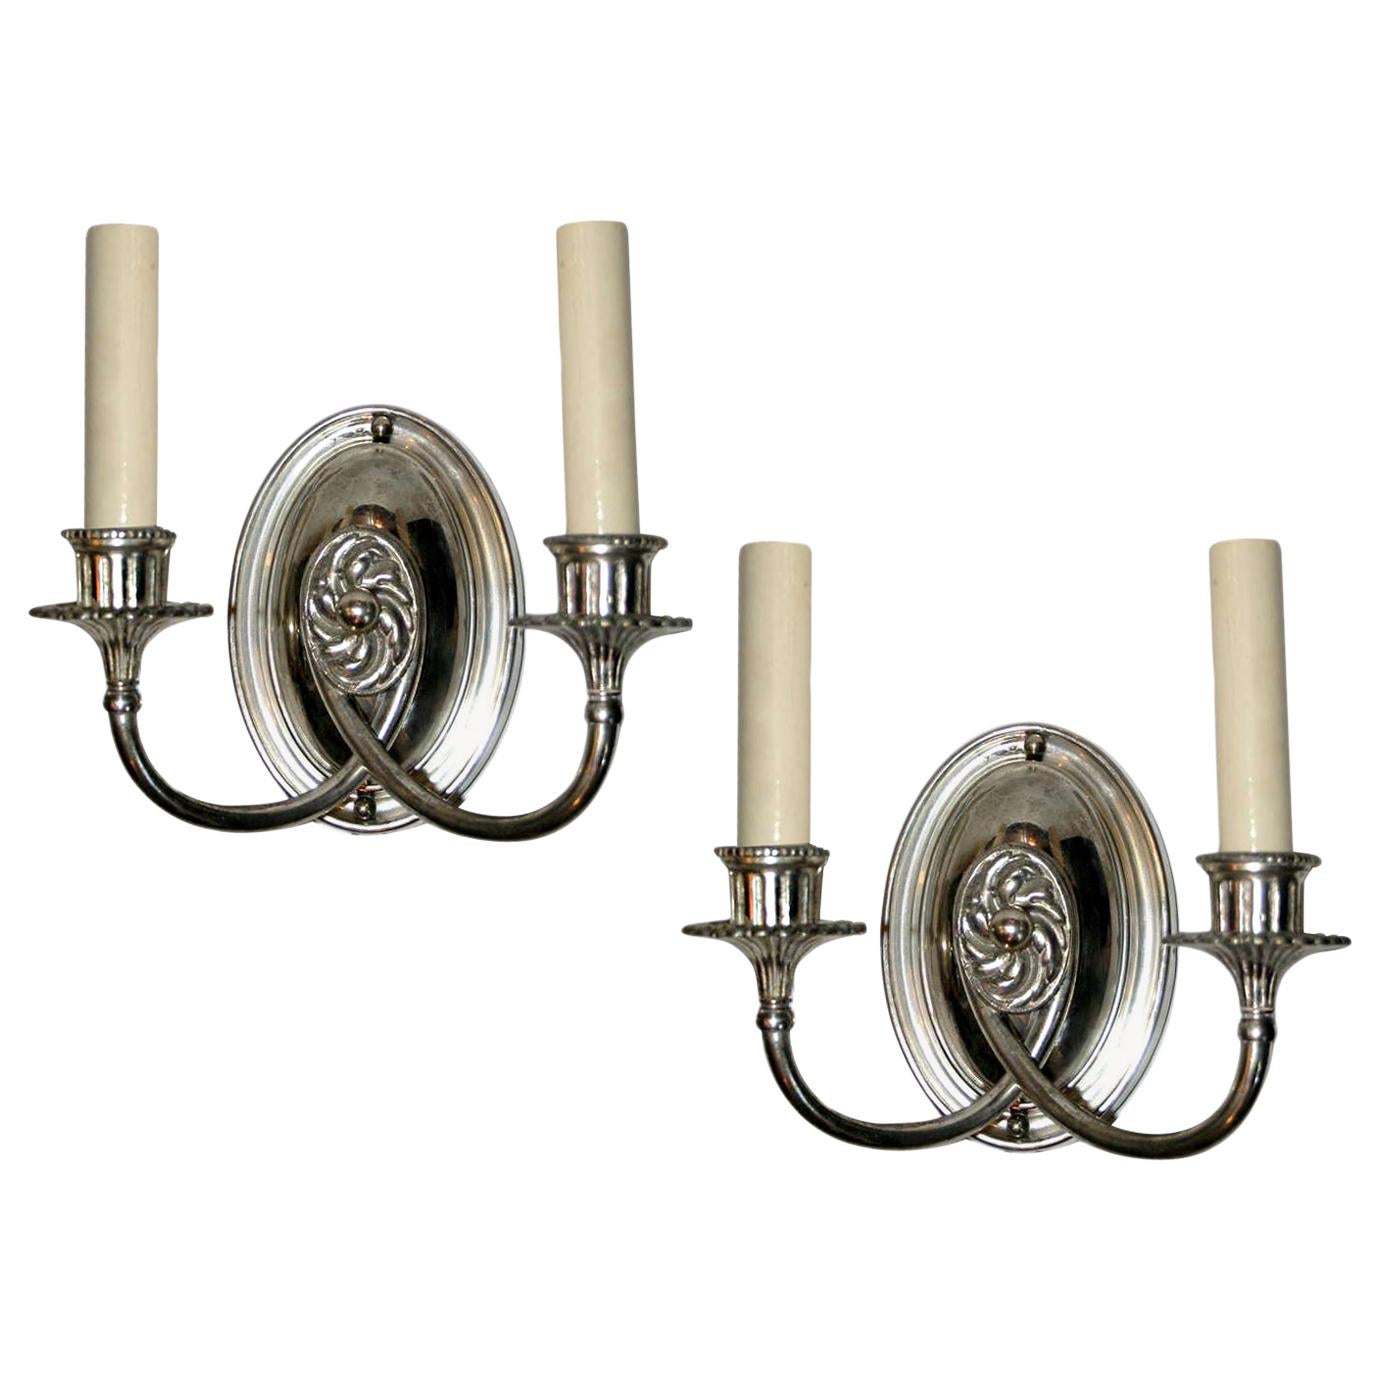 Neoclassic Silver Plated Sconces For Sale